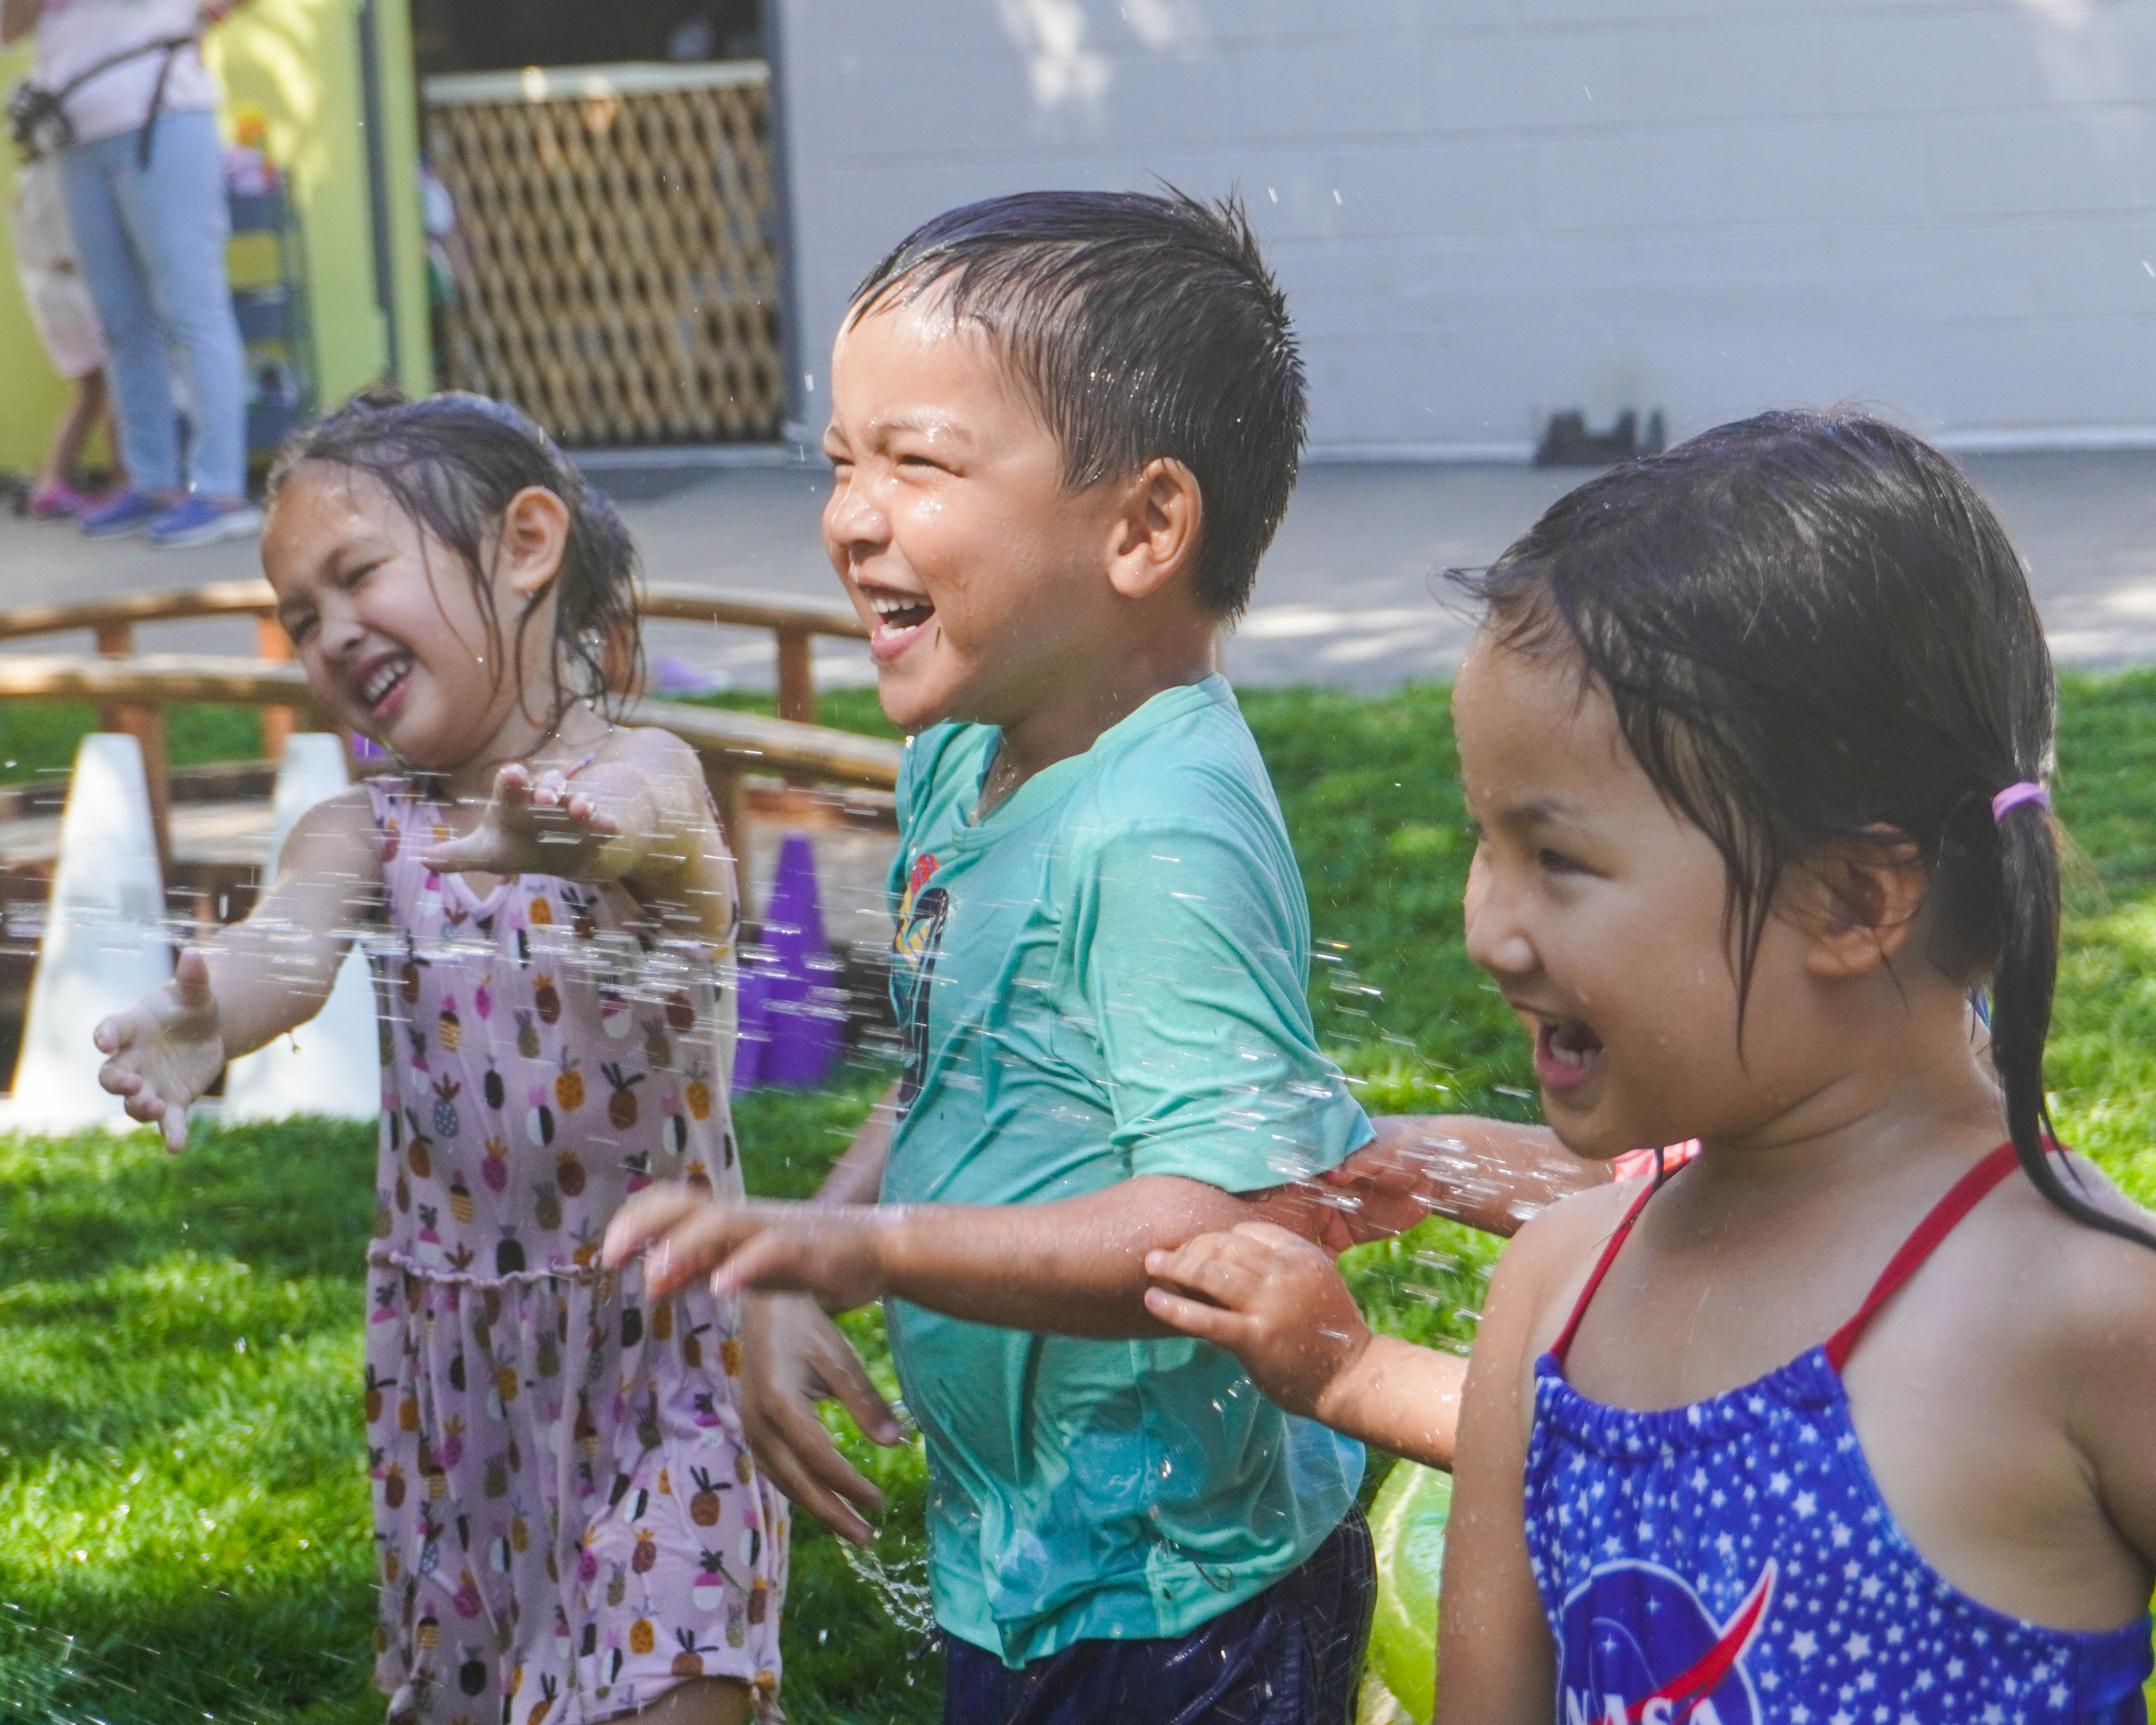 Water play brings smiles to the youngest students faces along with huge developmental benefits.